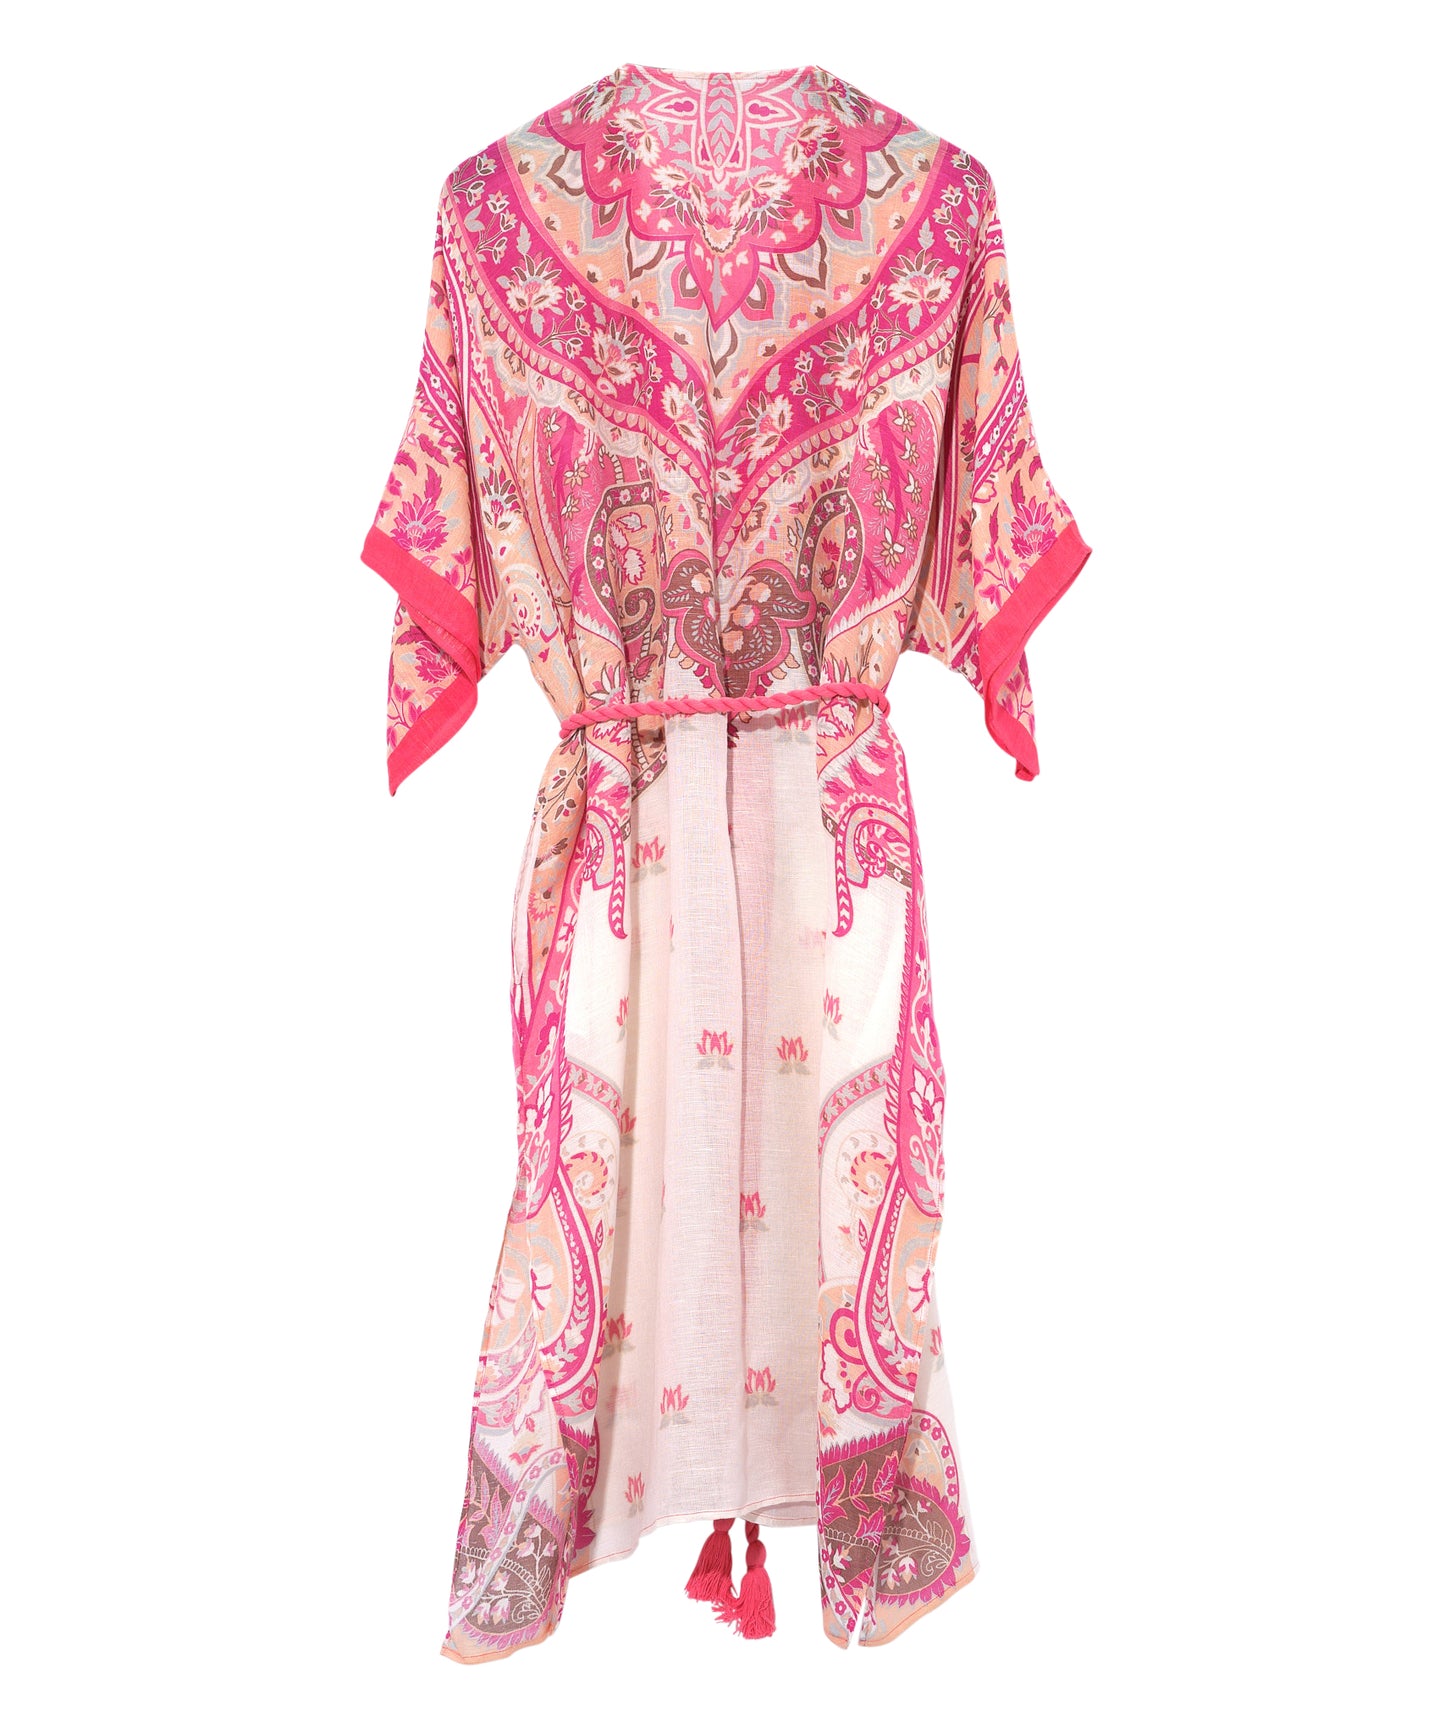 Paisley Longline Duster in color sunkissed coral